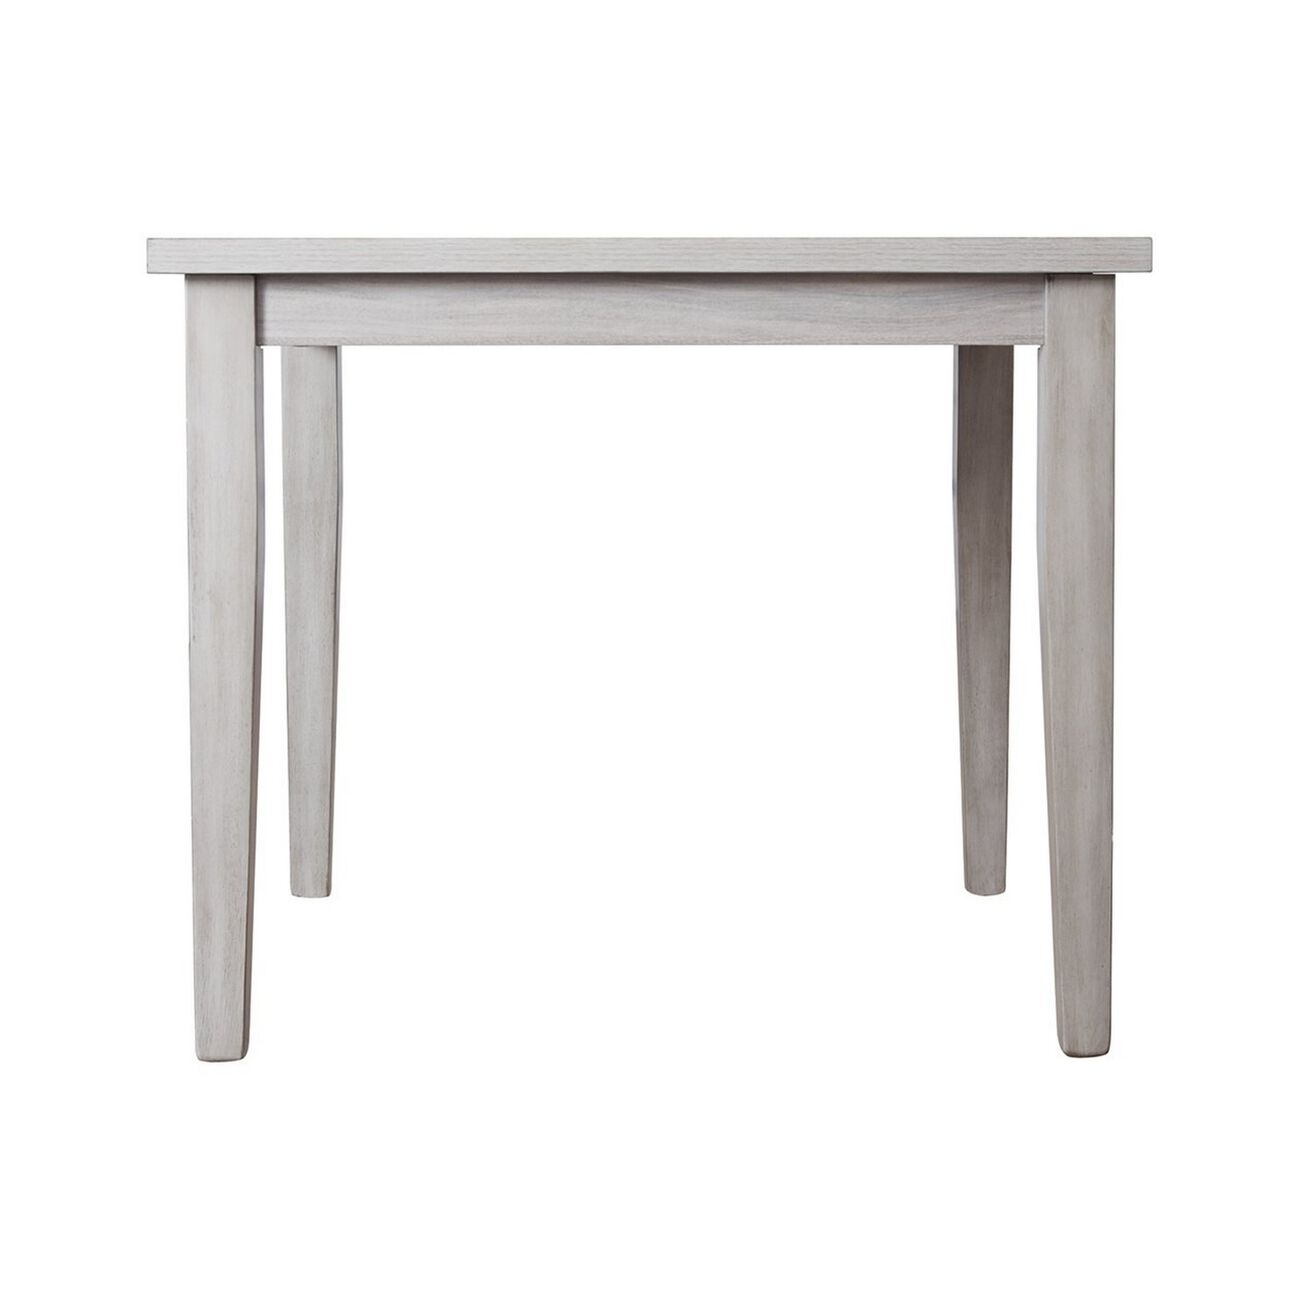 Square Dining Table with Barn Texture and Tapered Legs, Weathered Gray